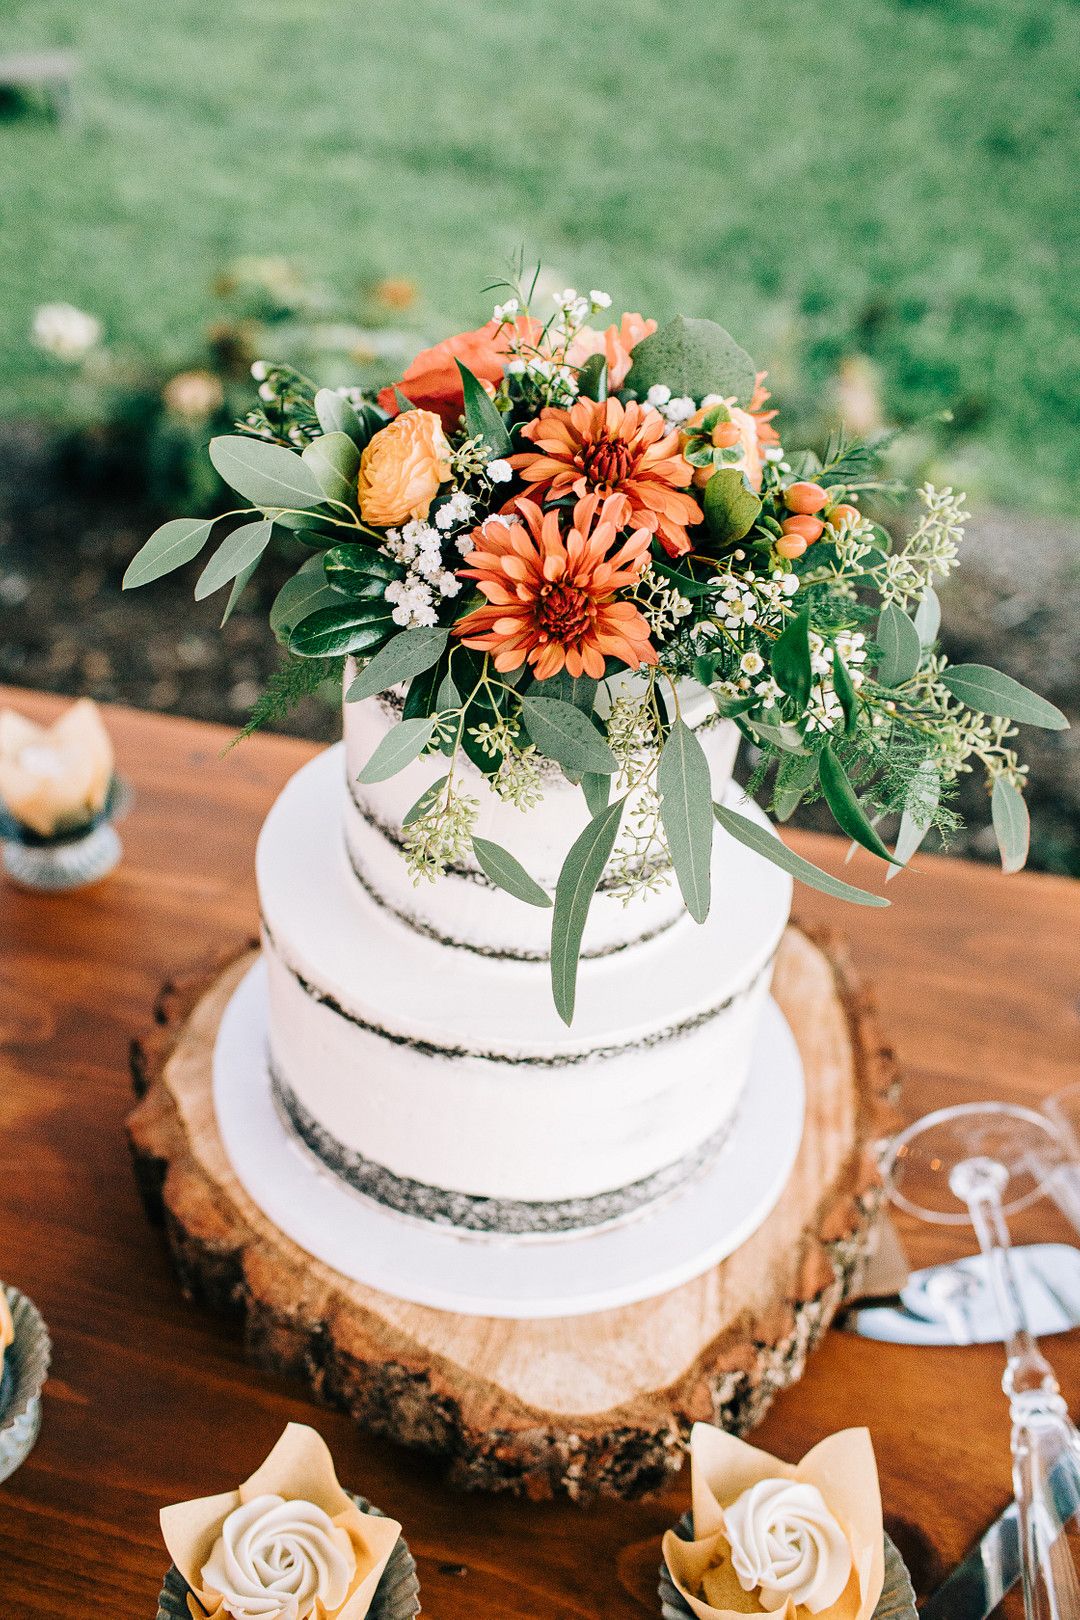 tiered cake with fresh florals